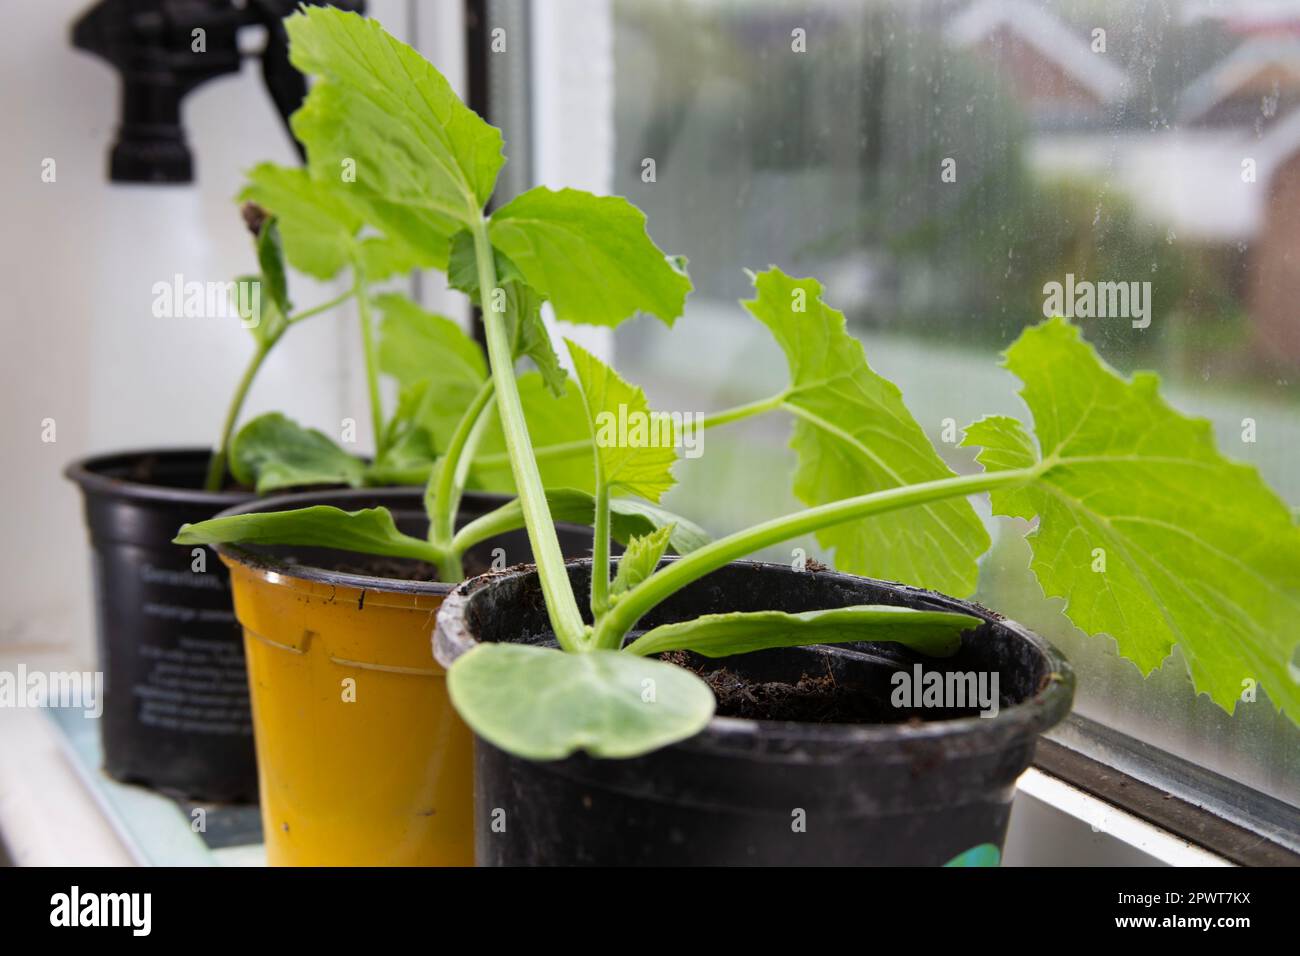 Courgette plants growing in a windowsill Stock Photo